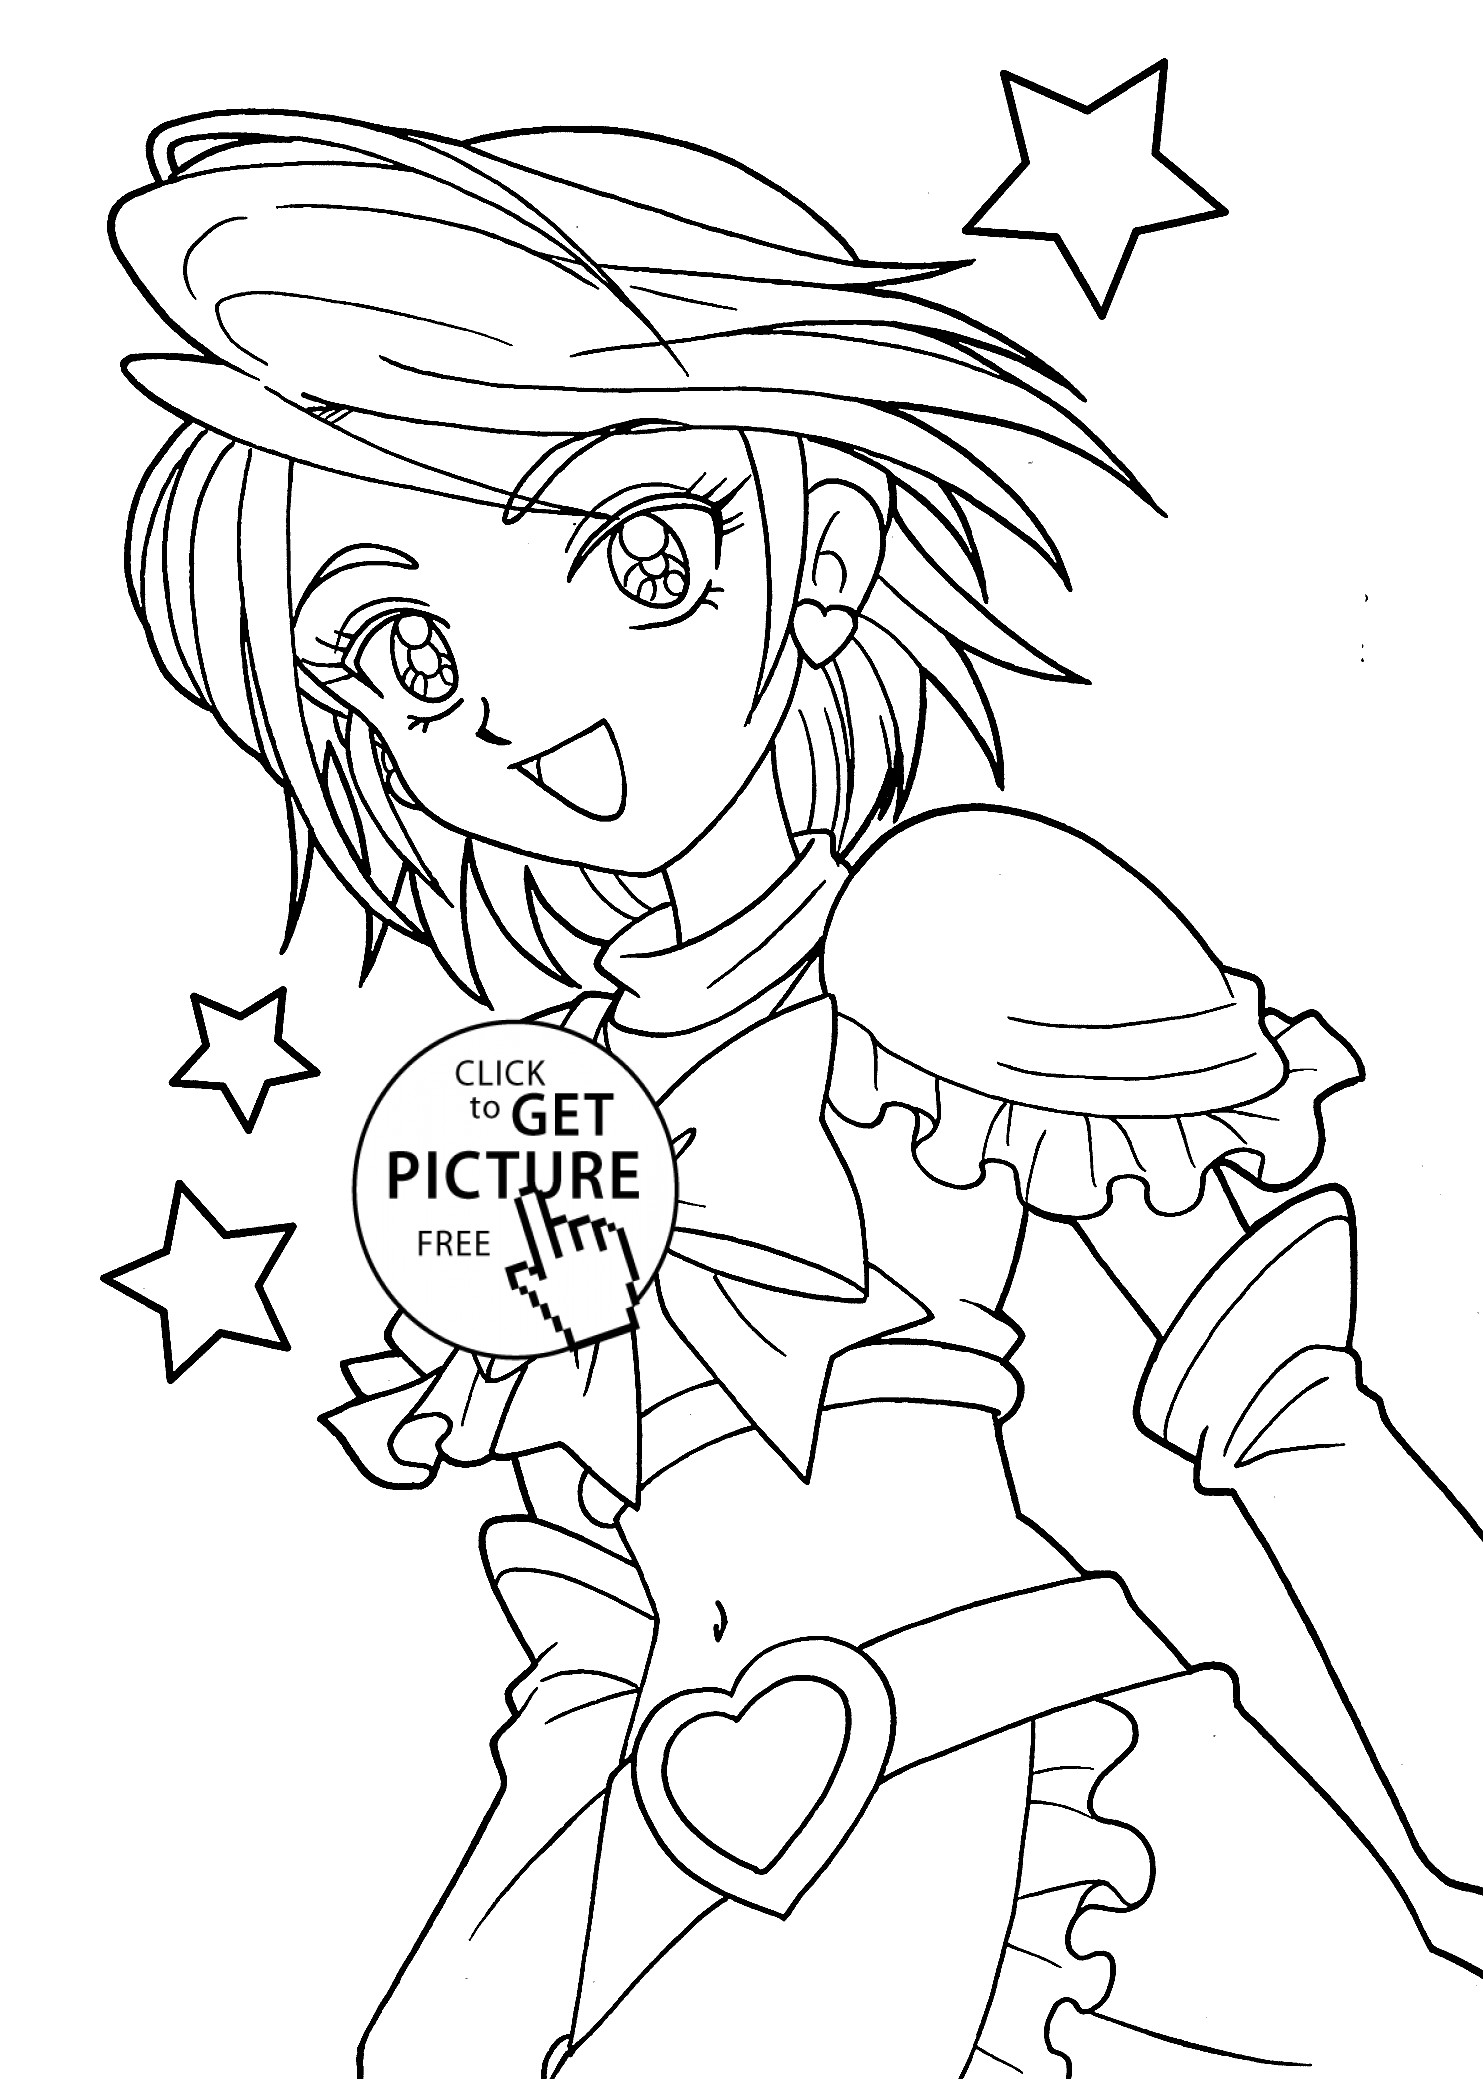 Cute Anime Girls Coloring Pages
 Cute Anime Girl Coloring Pages to Print